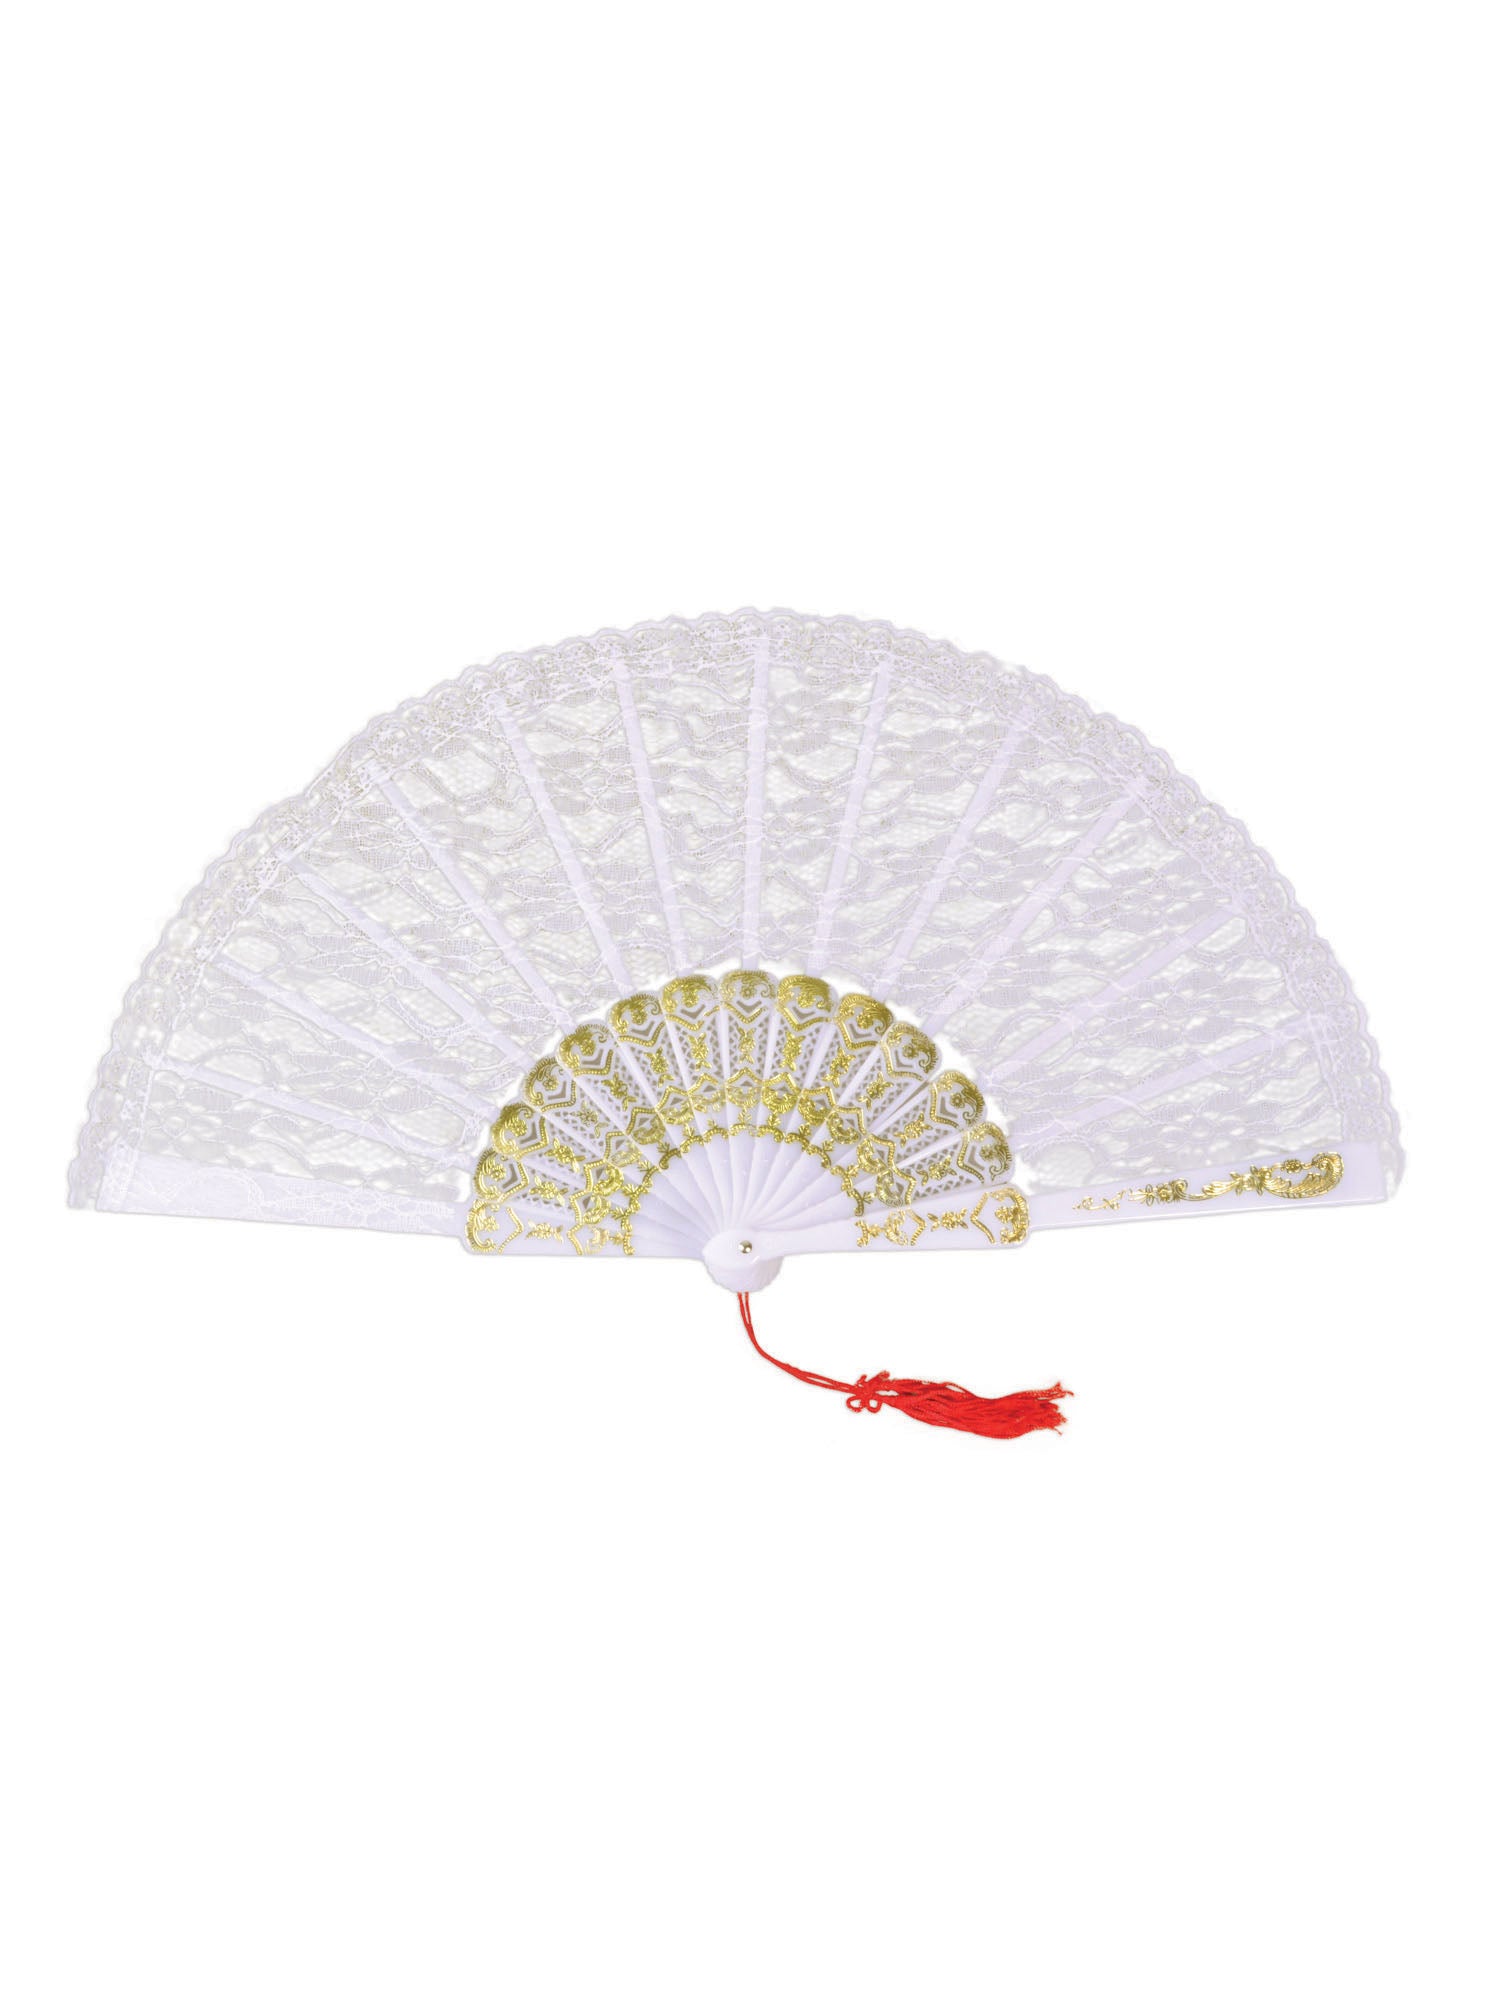 White Fan, White, Generic, Accessories, One Size, Front